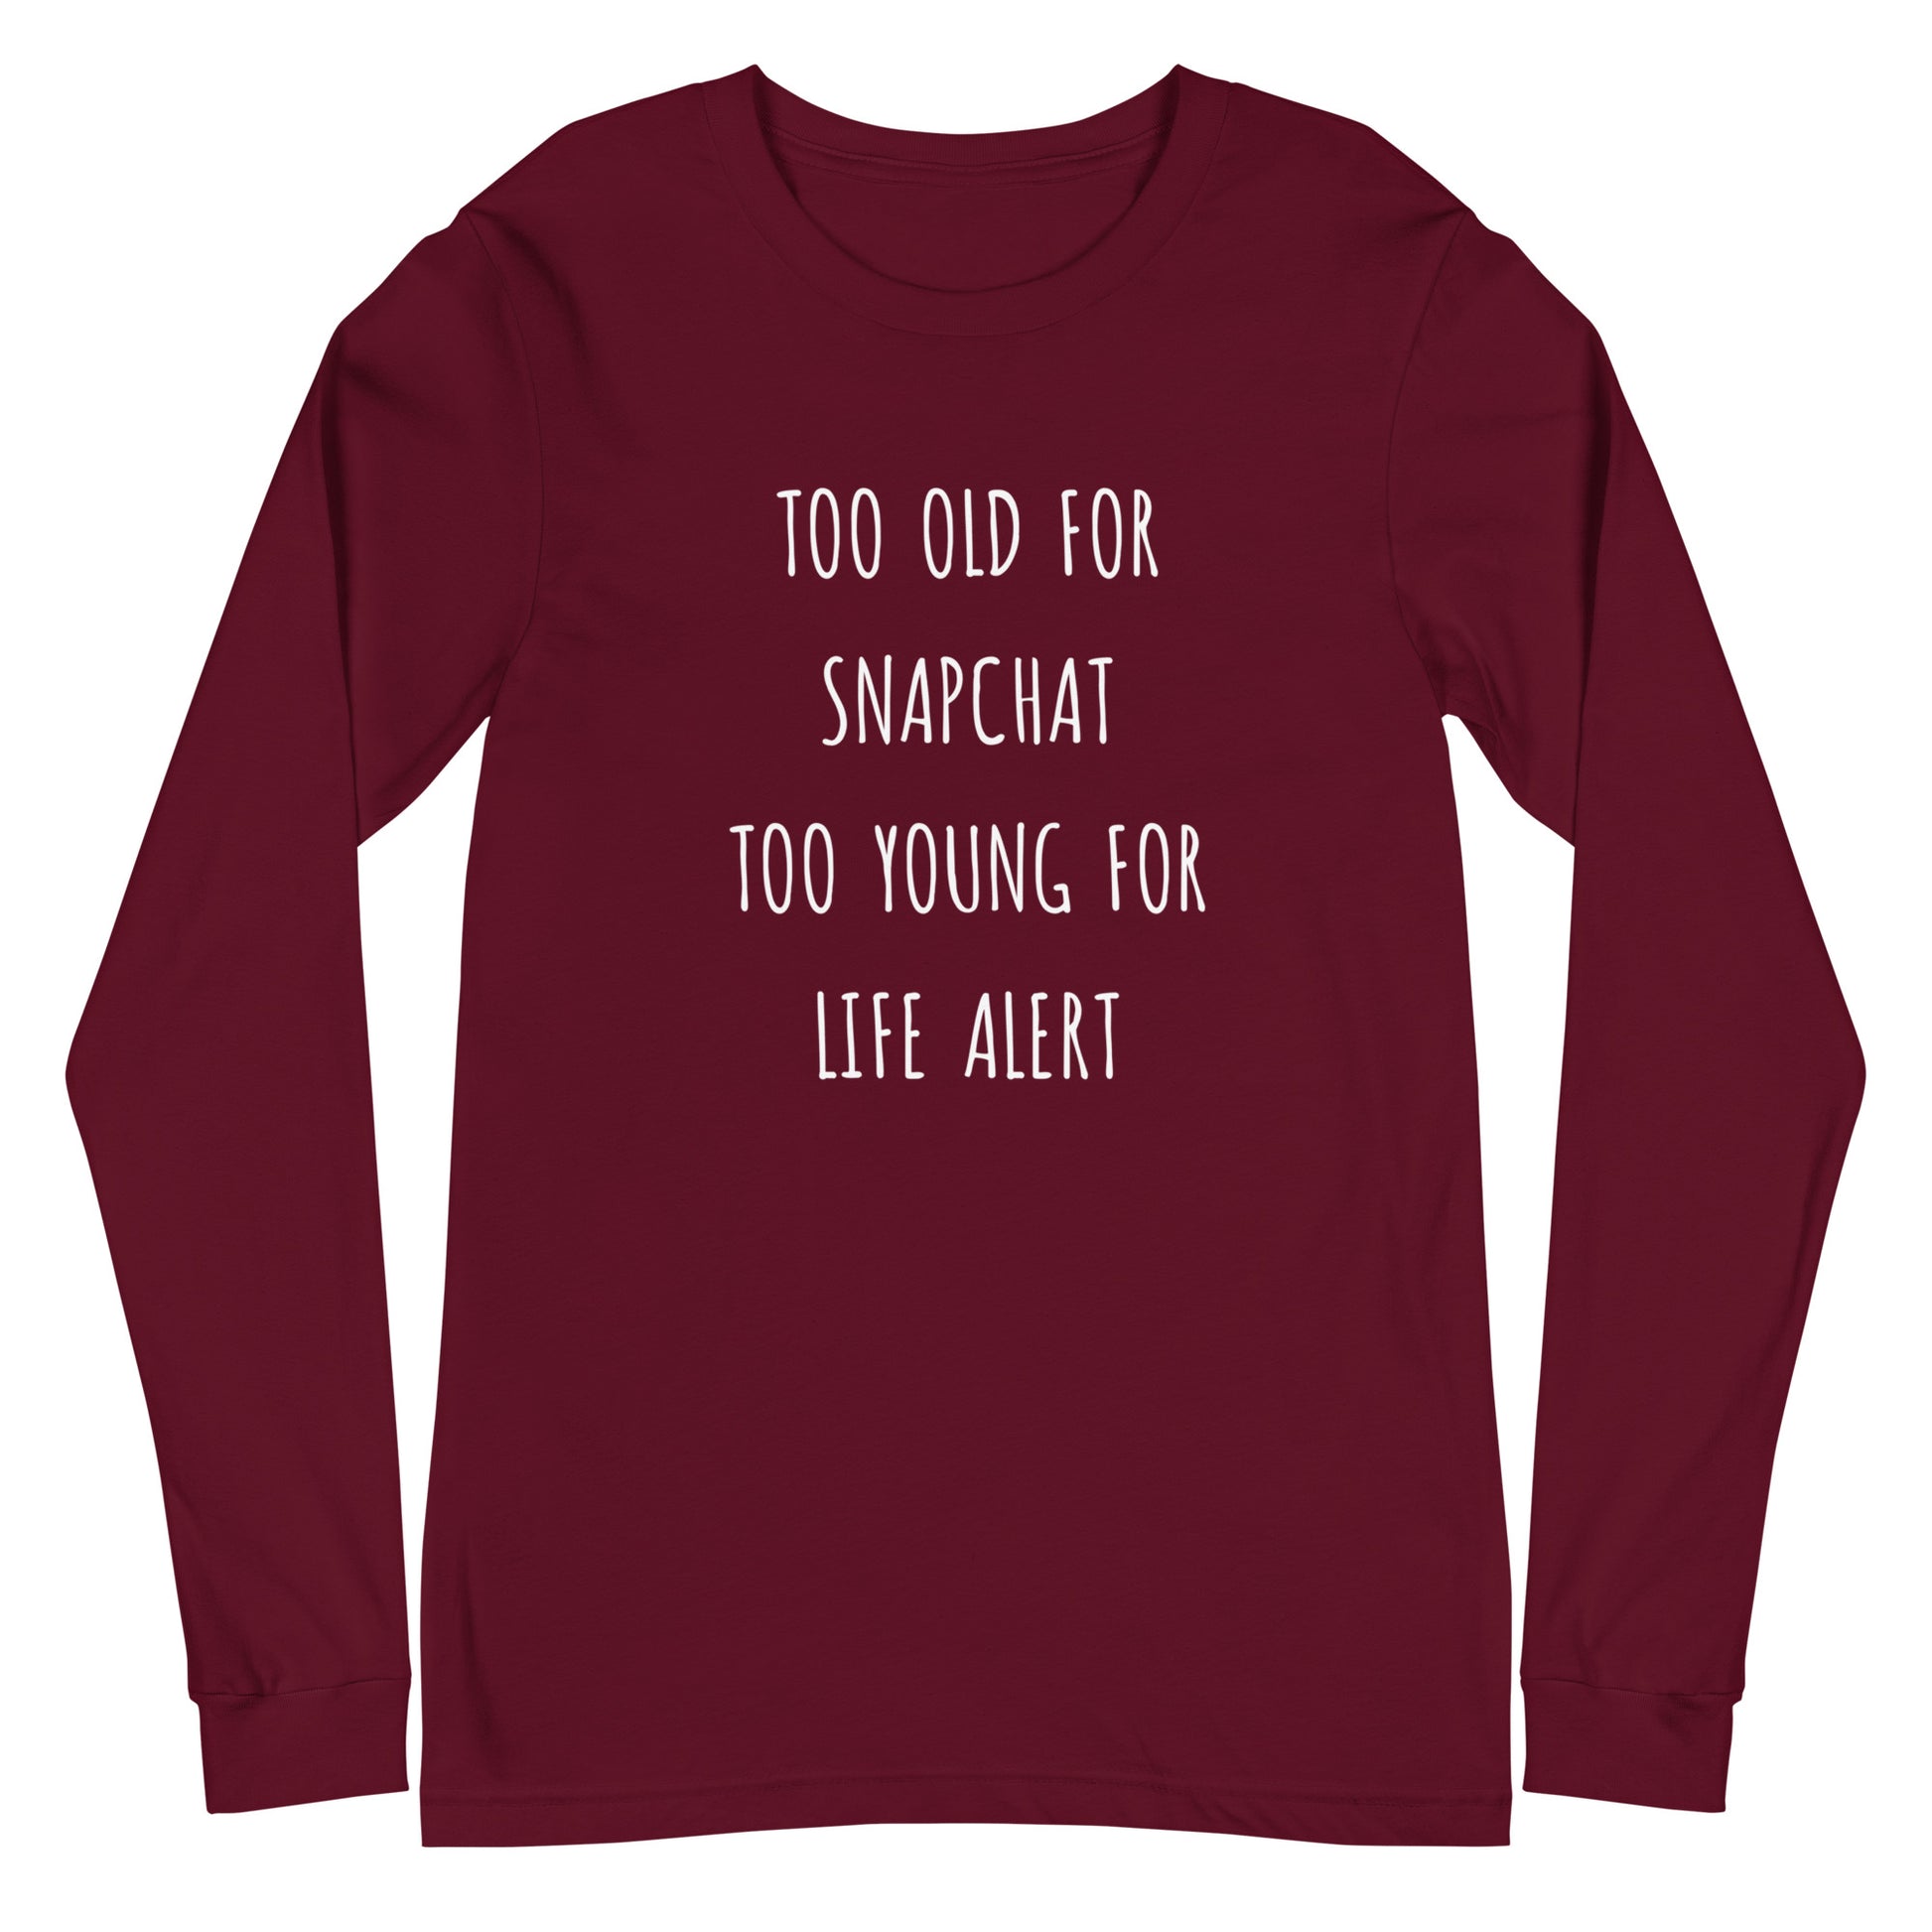 Too Old for Snapchat Too Young for Life Alert Long Sleeve Shirt | Art in Aging